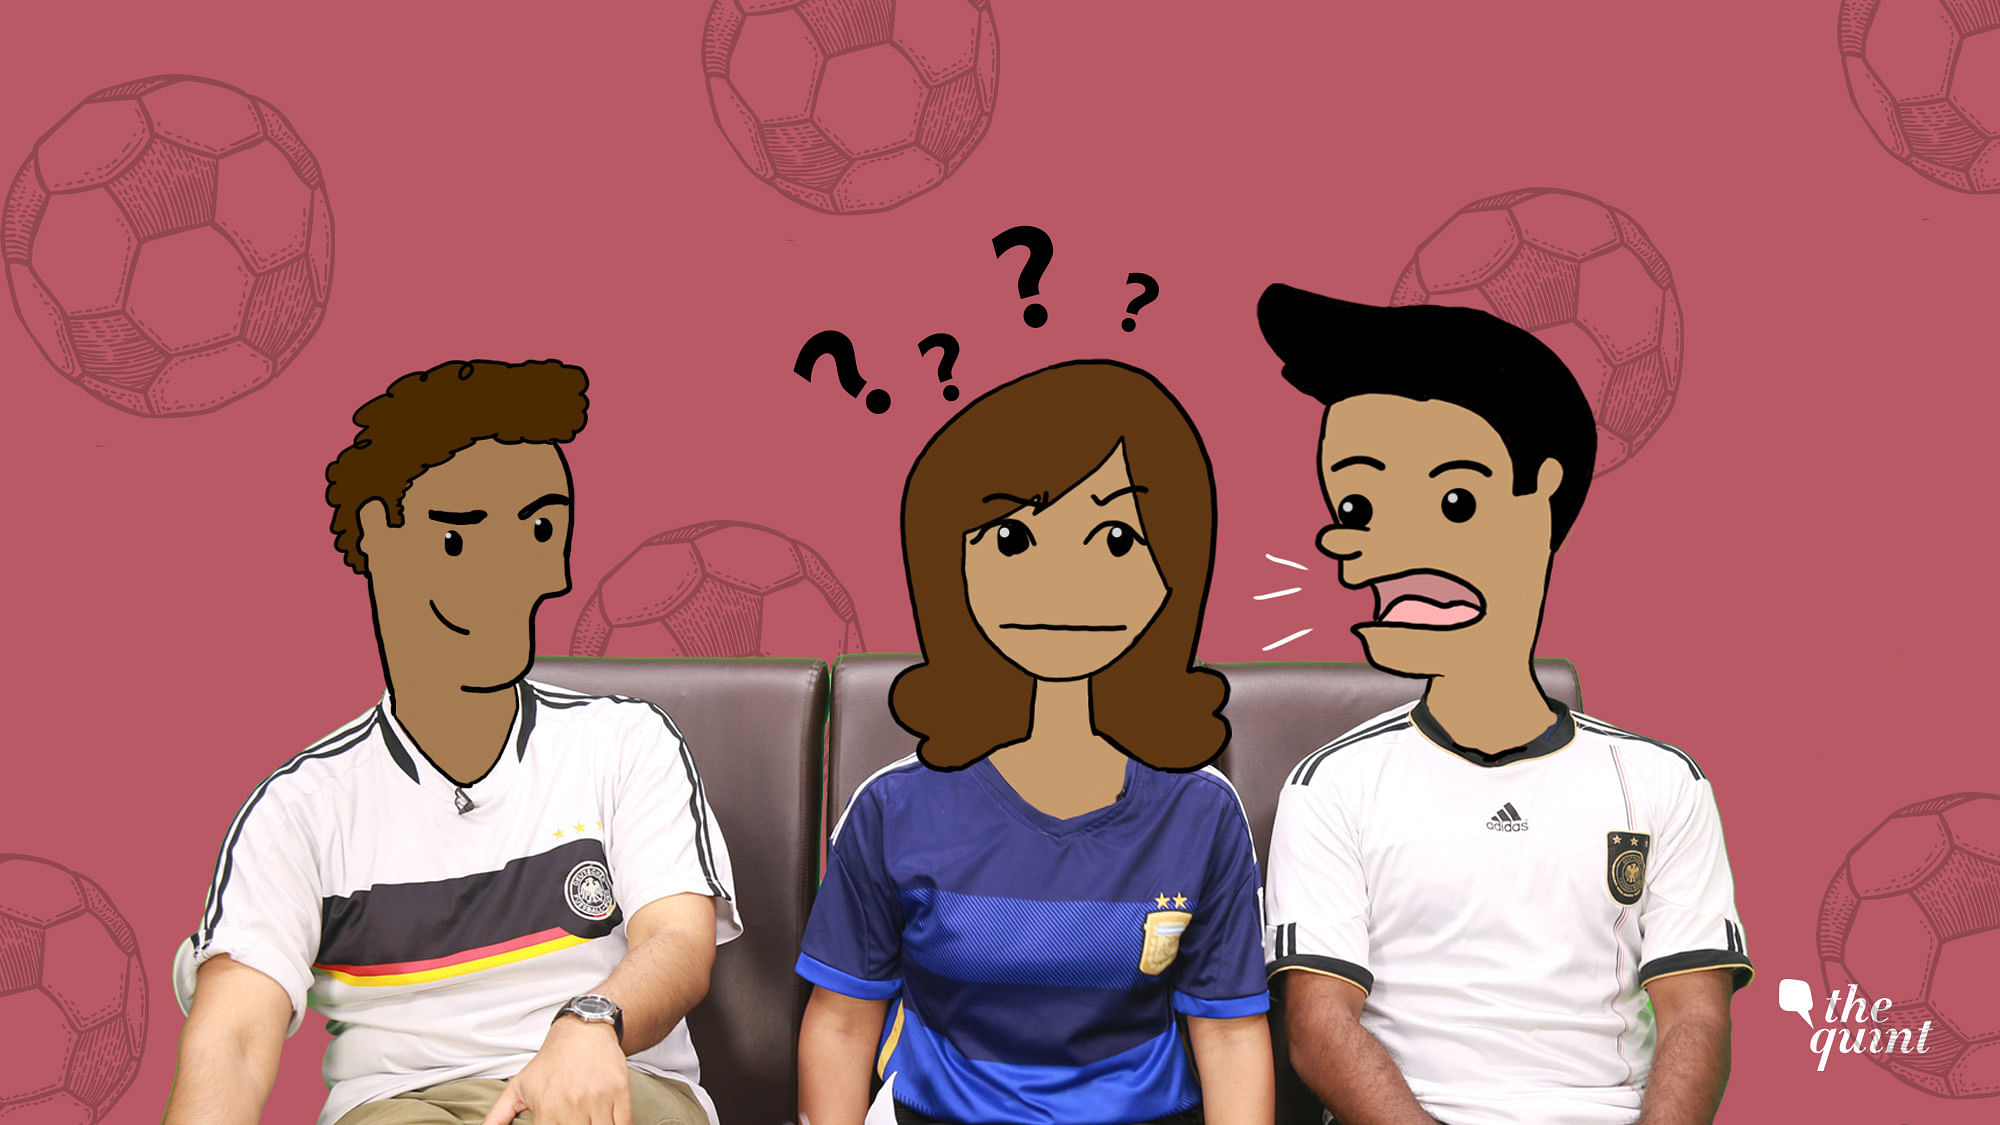 Just as mosquitoes breed in the monsoon, men breed their sexist remarks during the World Cup.